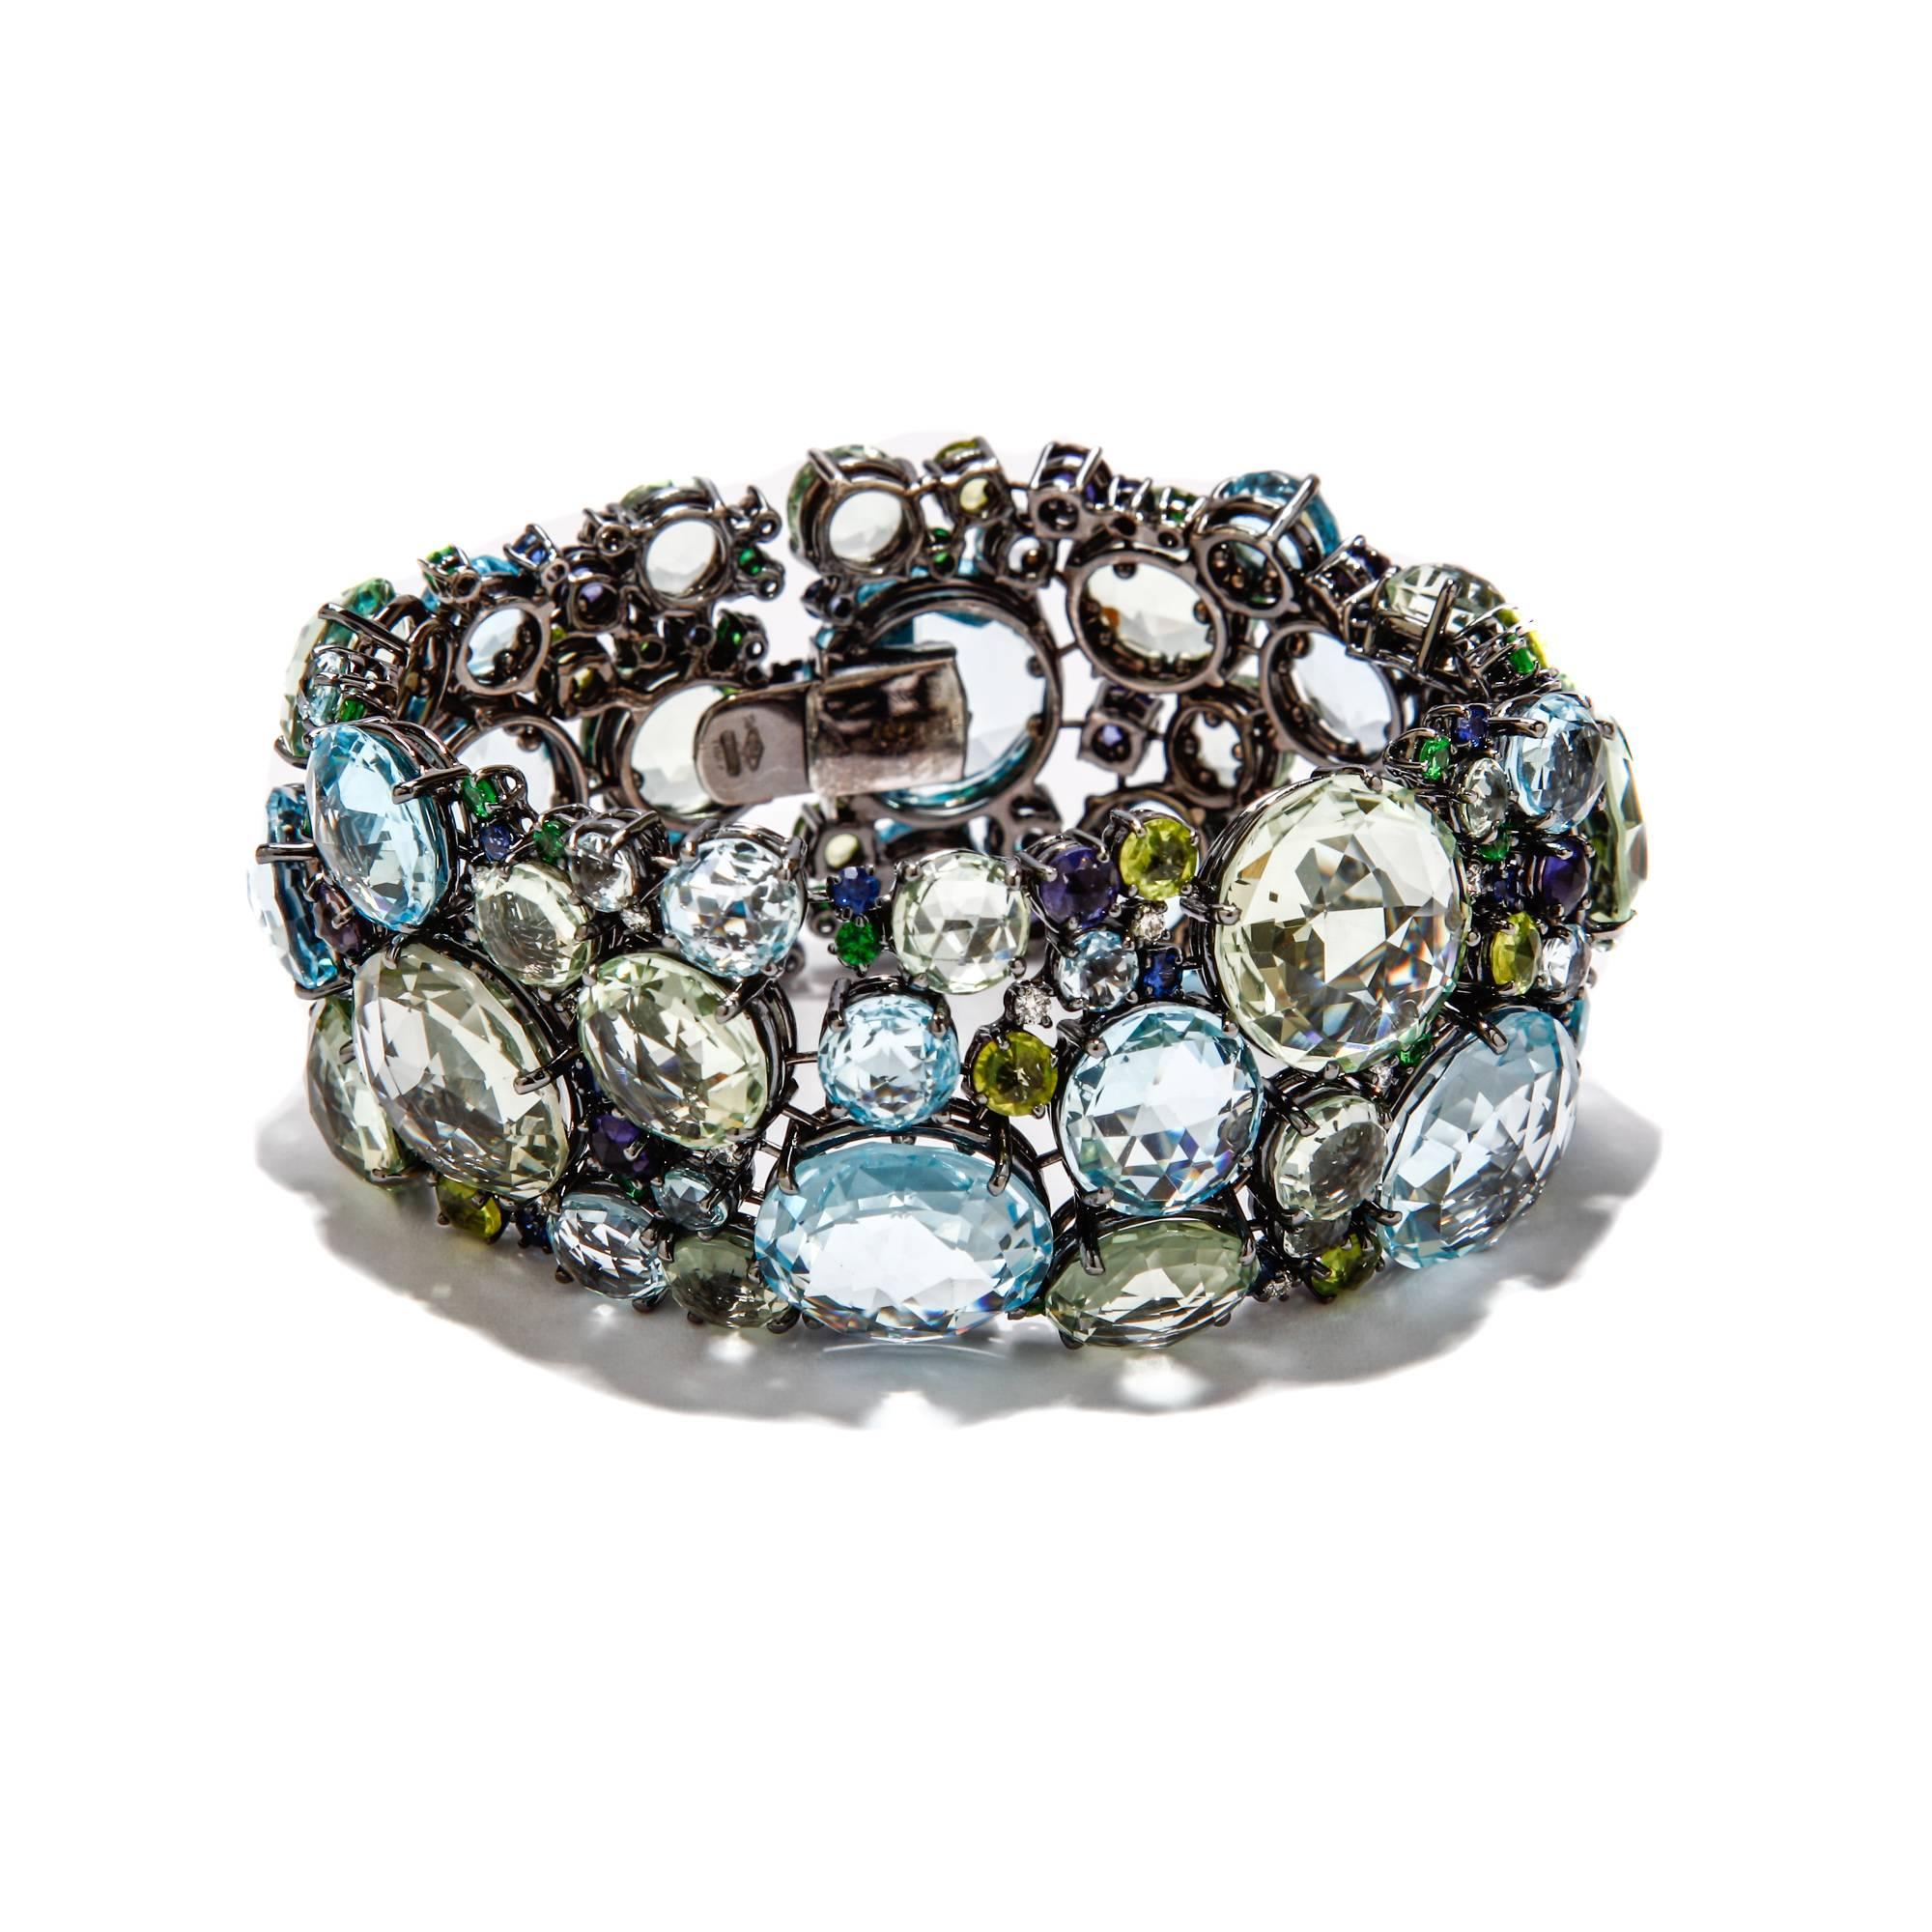 This A & Furst bracelet features 181.12 ct. of prasiolite (green quartz), blue topaz, peridot, iolite, tsavorite garnet, blue sapphires, and peridot with 0.65 ct. of diamonds set in 18k white gold plated with black rhodium. A & Furst jewelry is